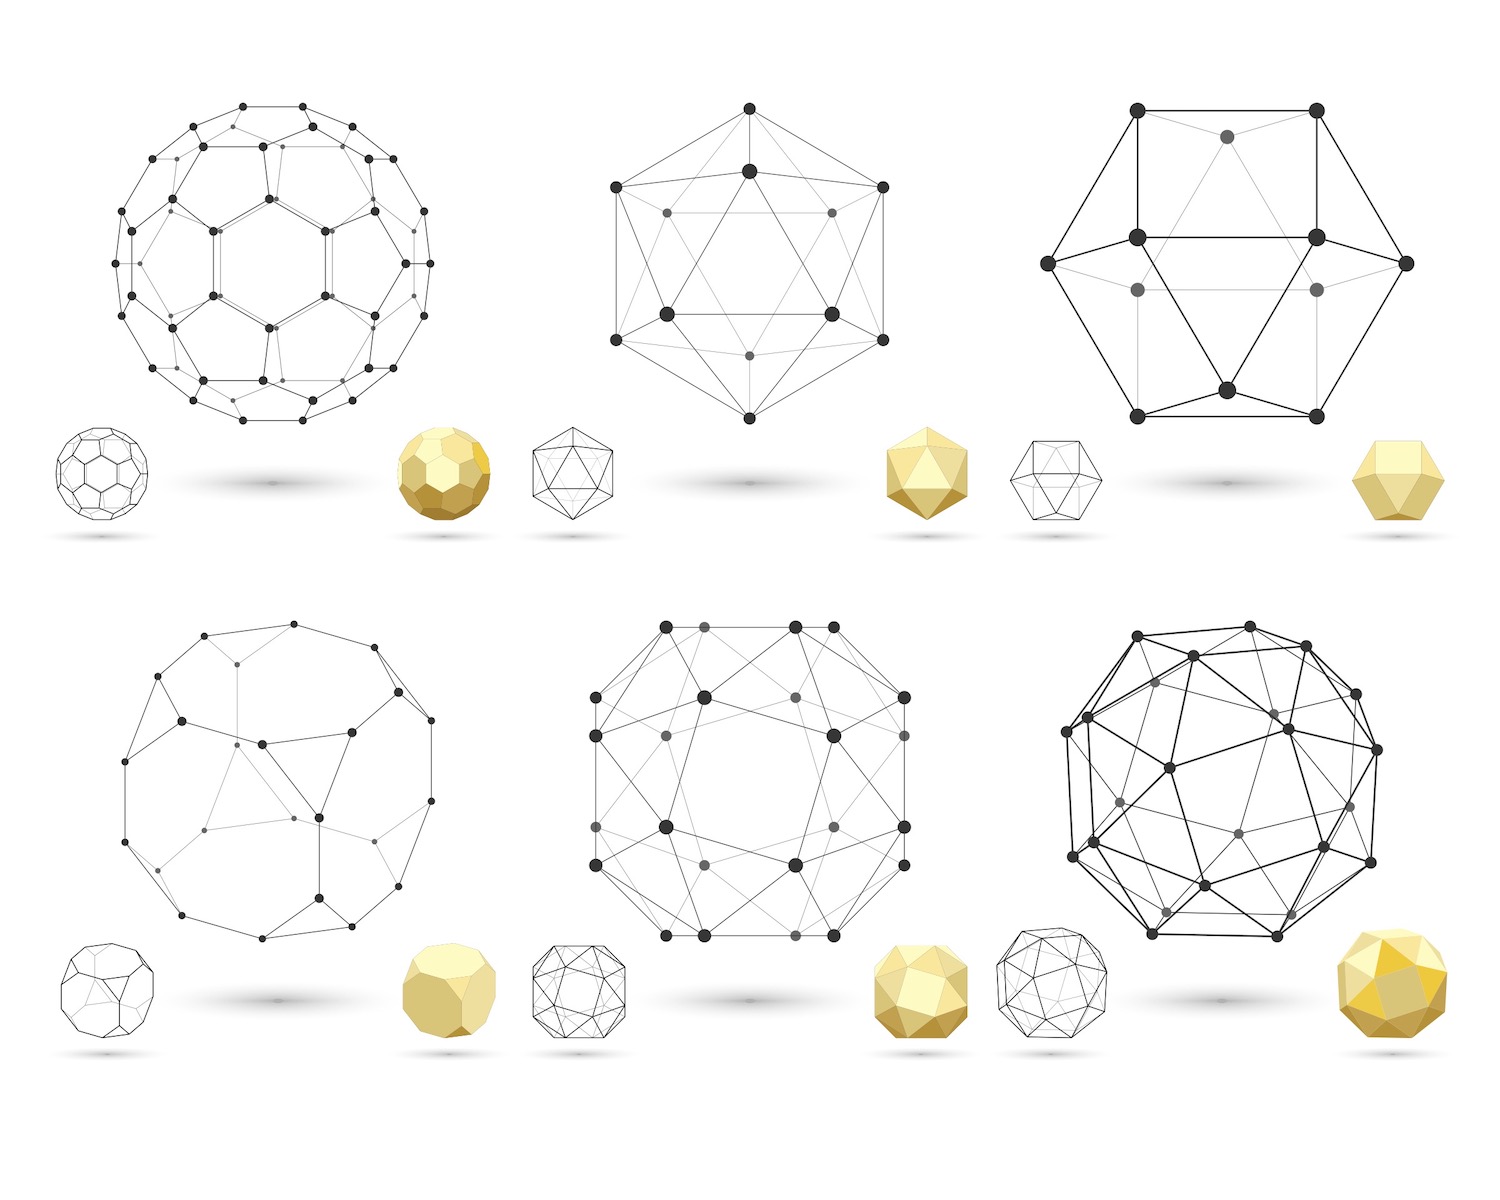 Technical origami reference image: Set of geometric 3D polyhedral shapes from triangular faces